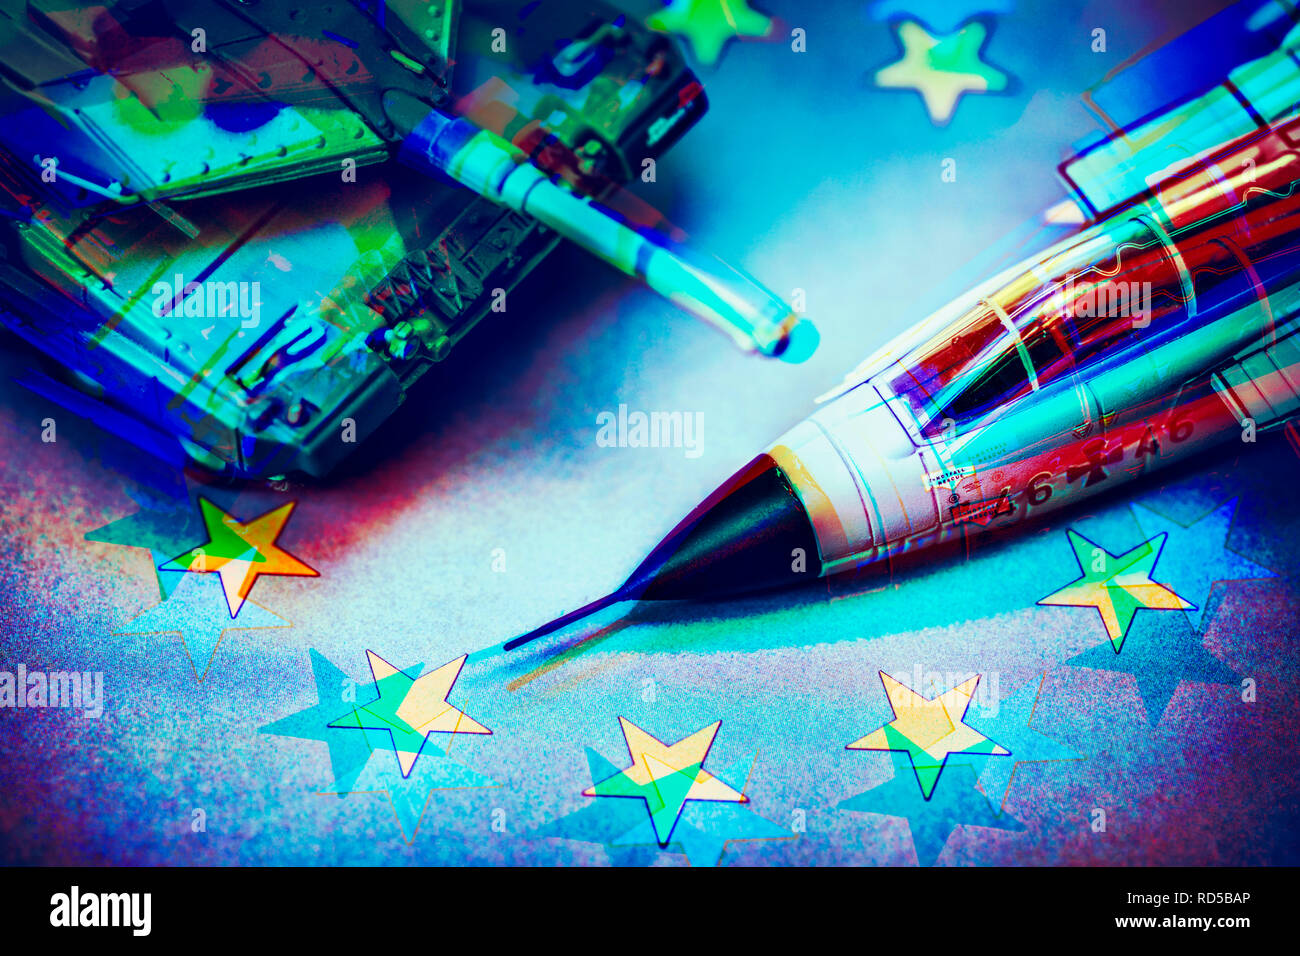 Page 2 - Eu Armee High Resolution Stock Photography and Images - Alamy